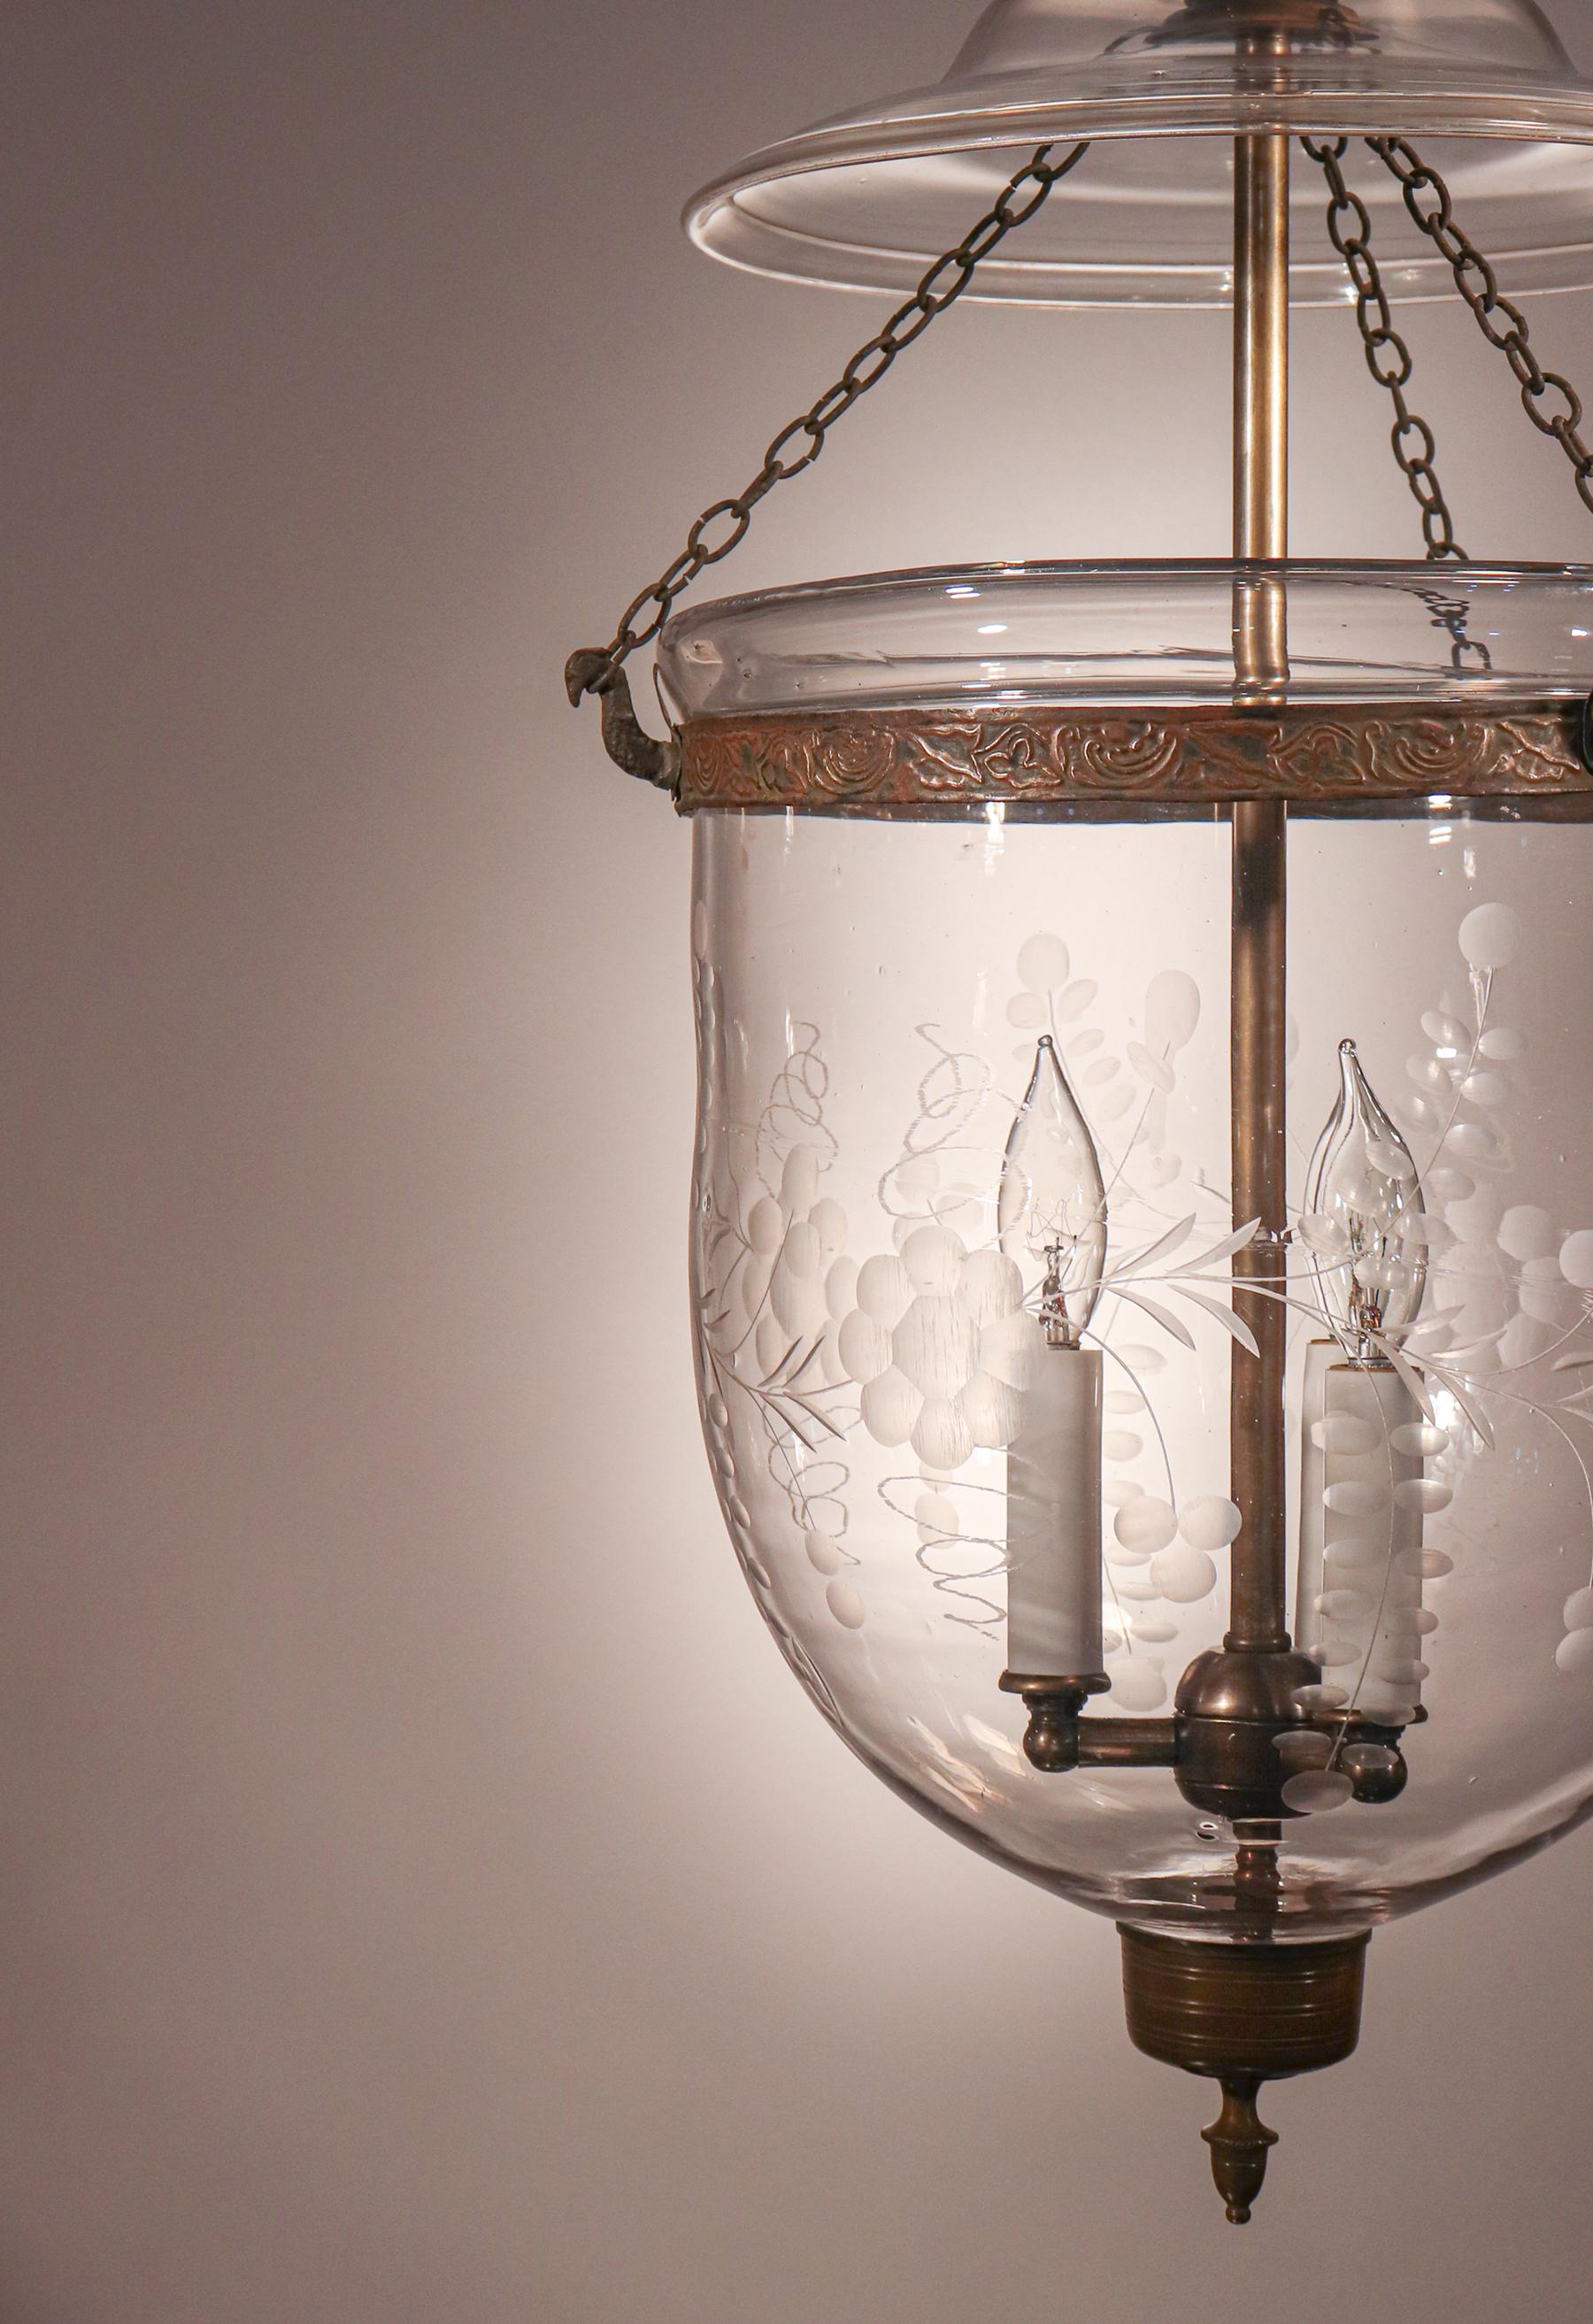 High Victorian Antique Bell Jar Lantern with Etched Floral Motif